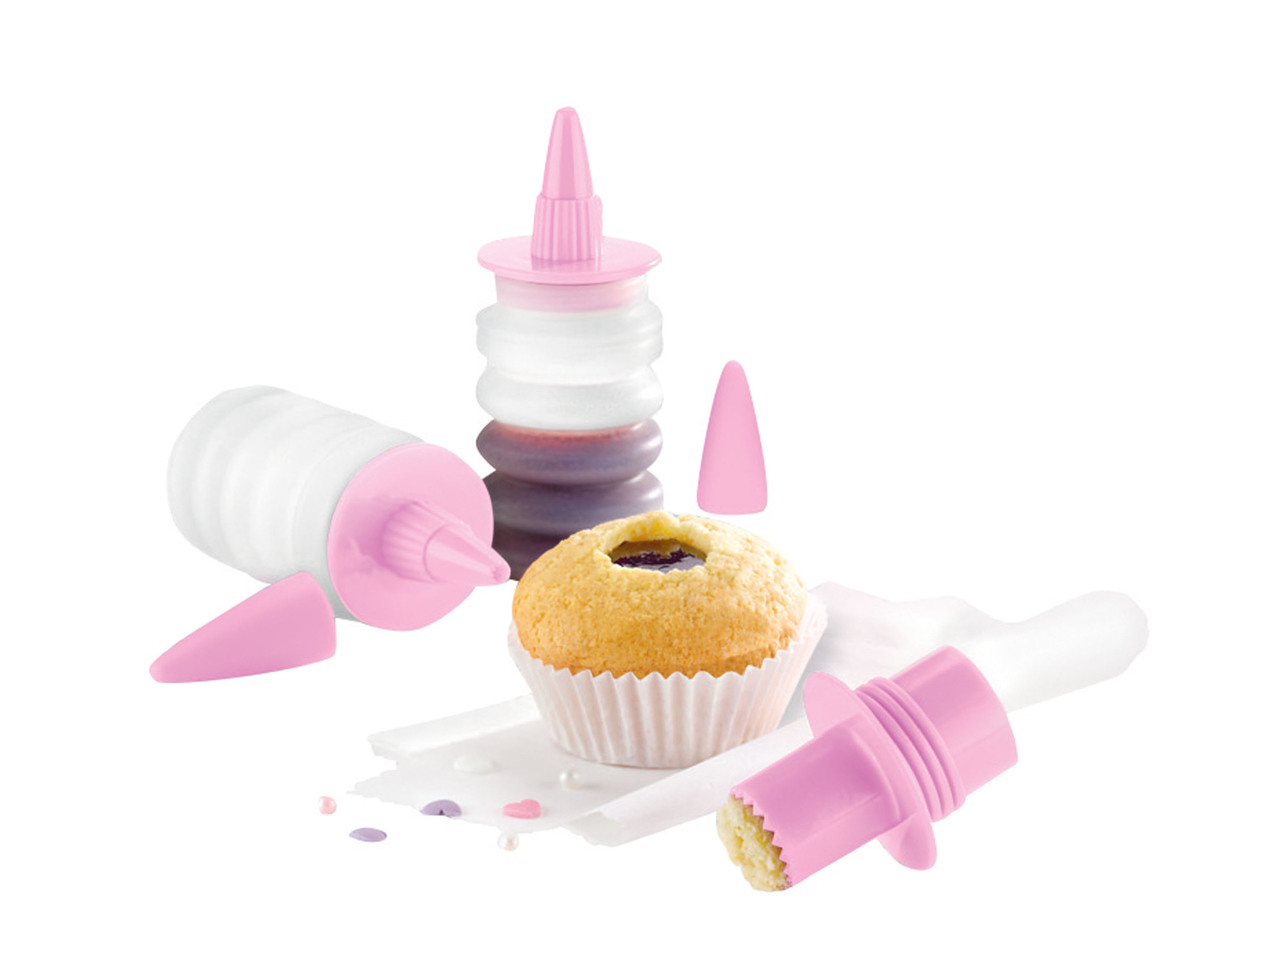 Cake/Lolly Mould or Cake Decorating Kit